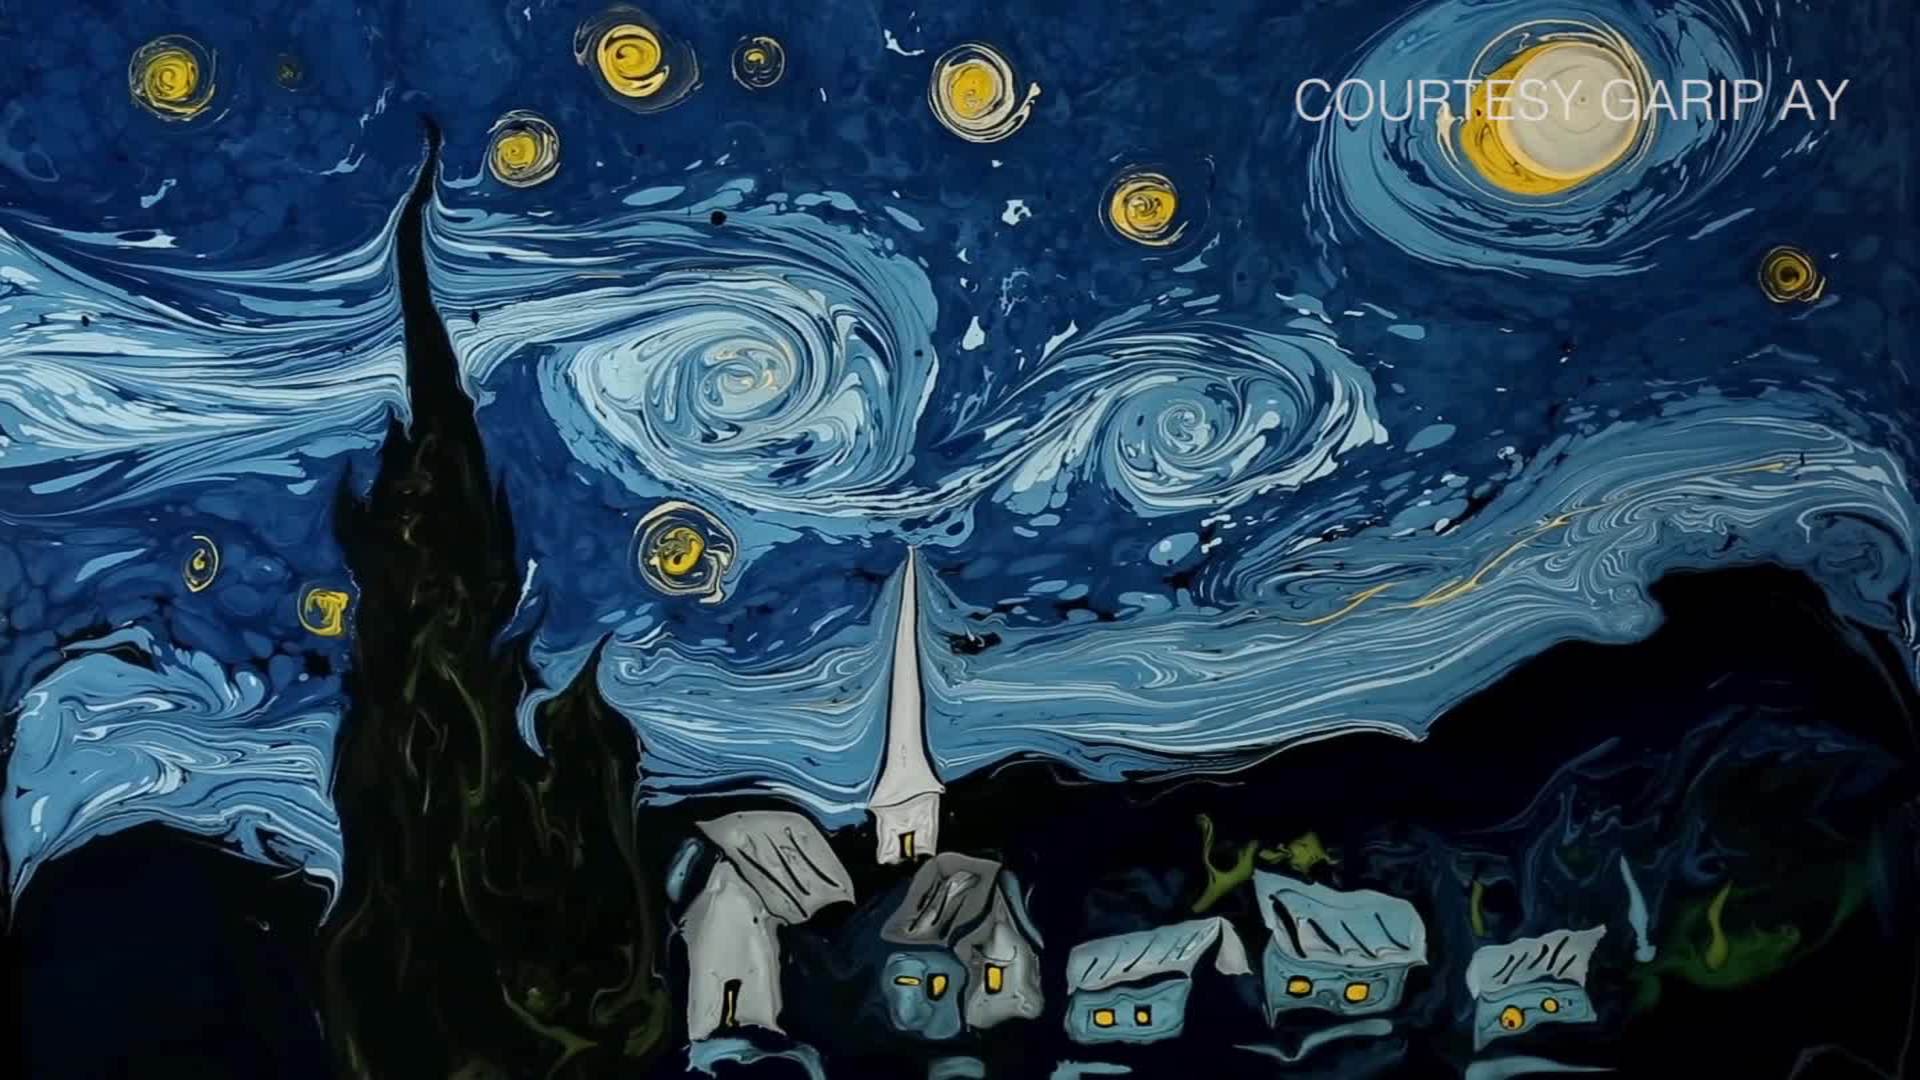 Van Gogh Watercolors - Just Add Water Silly